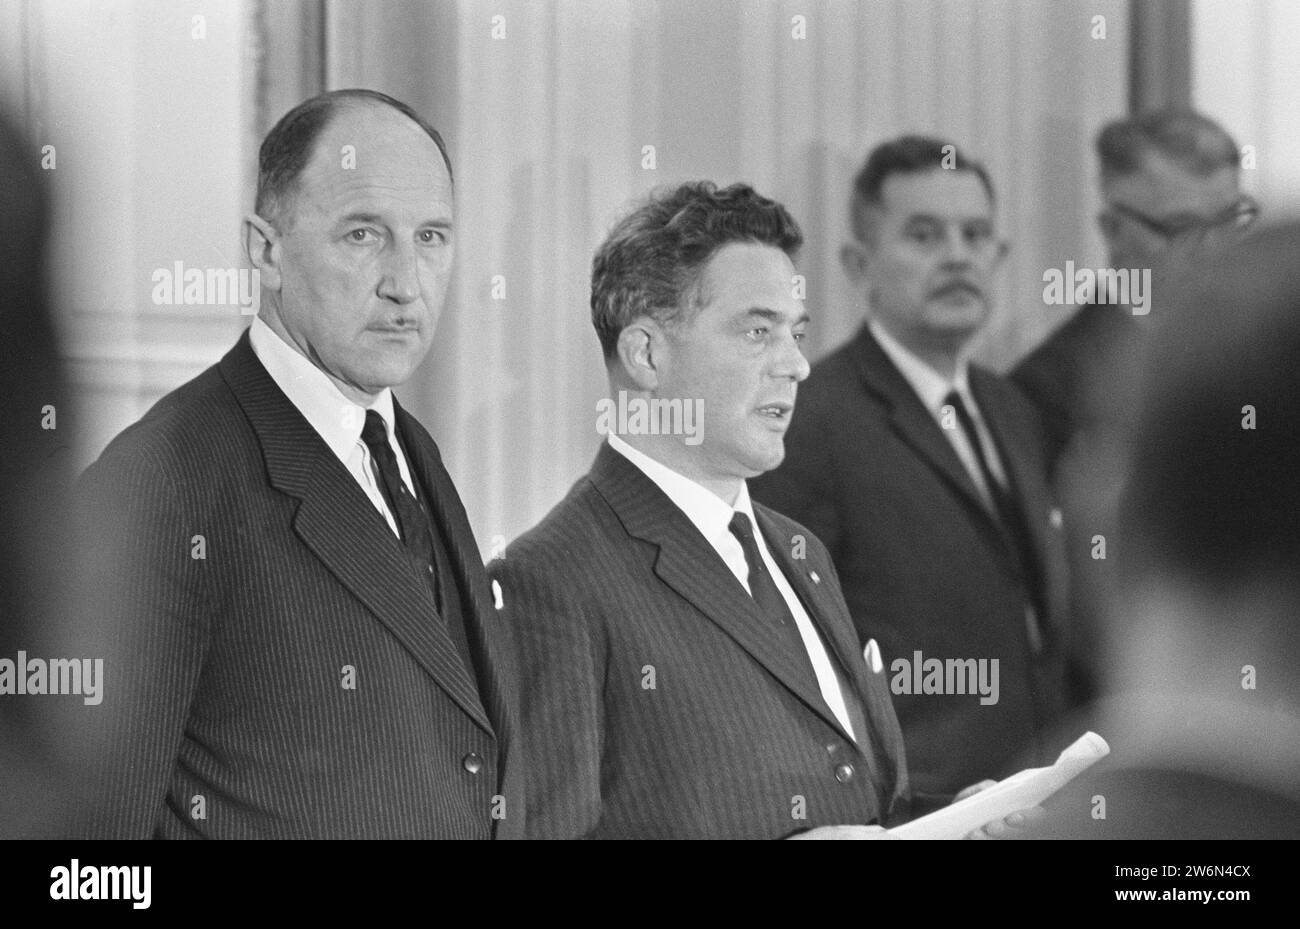 Statements made in the Senate and House of Representatives after the marriage of Princess Irene, Minister Luns and Prime Minister Marijnen ca. April 29, 1964 Stock Photo